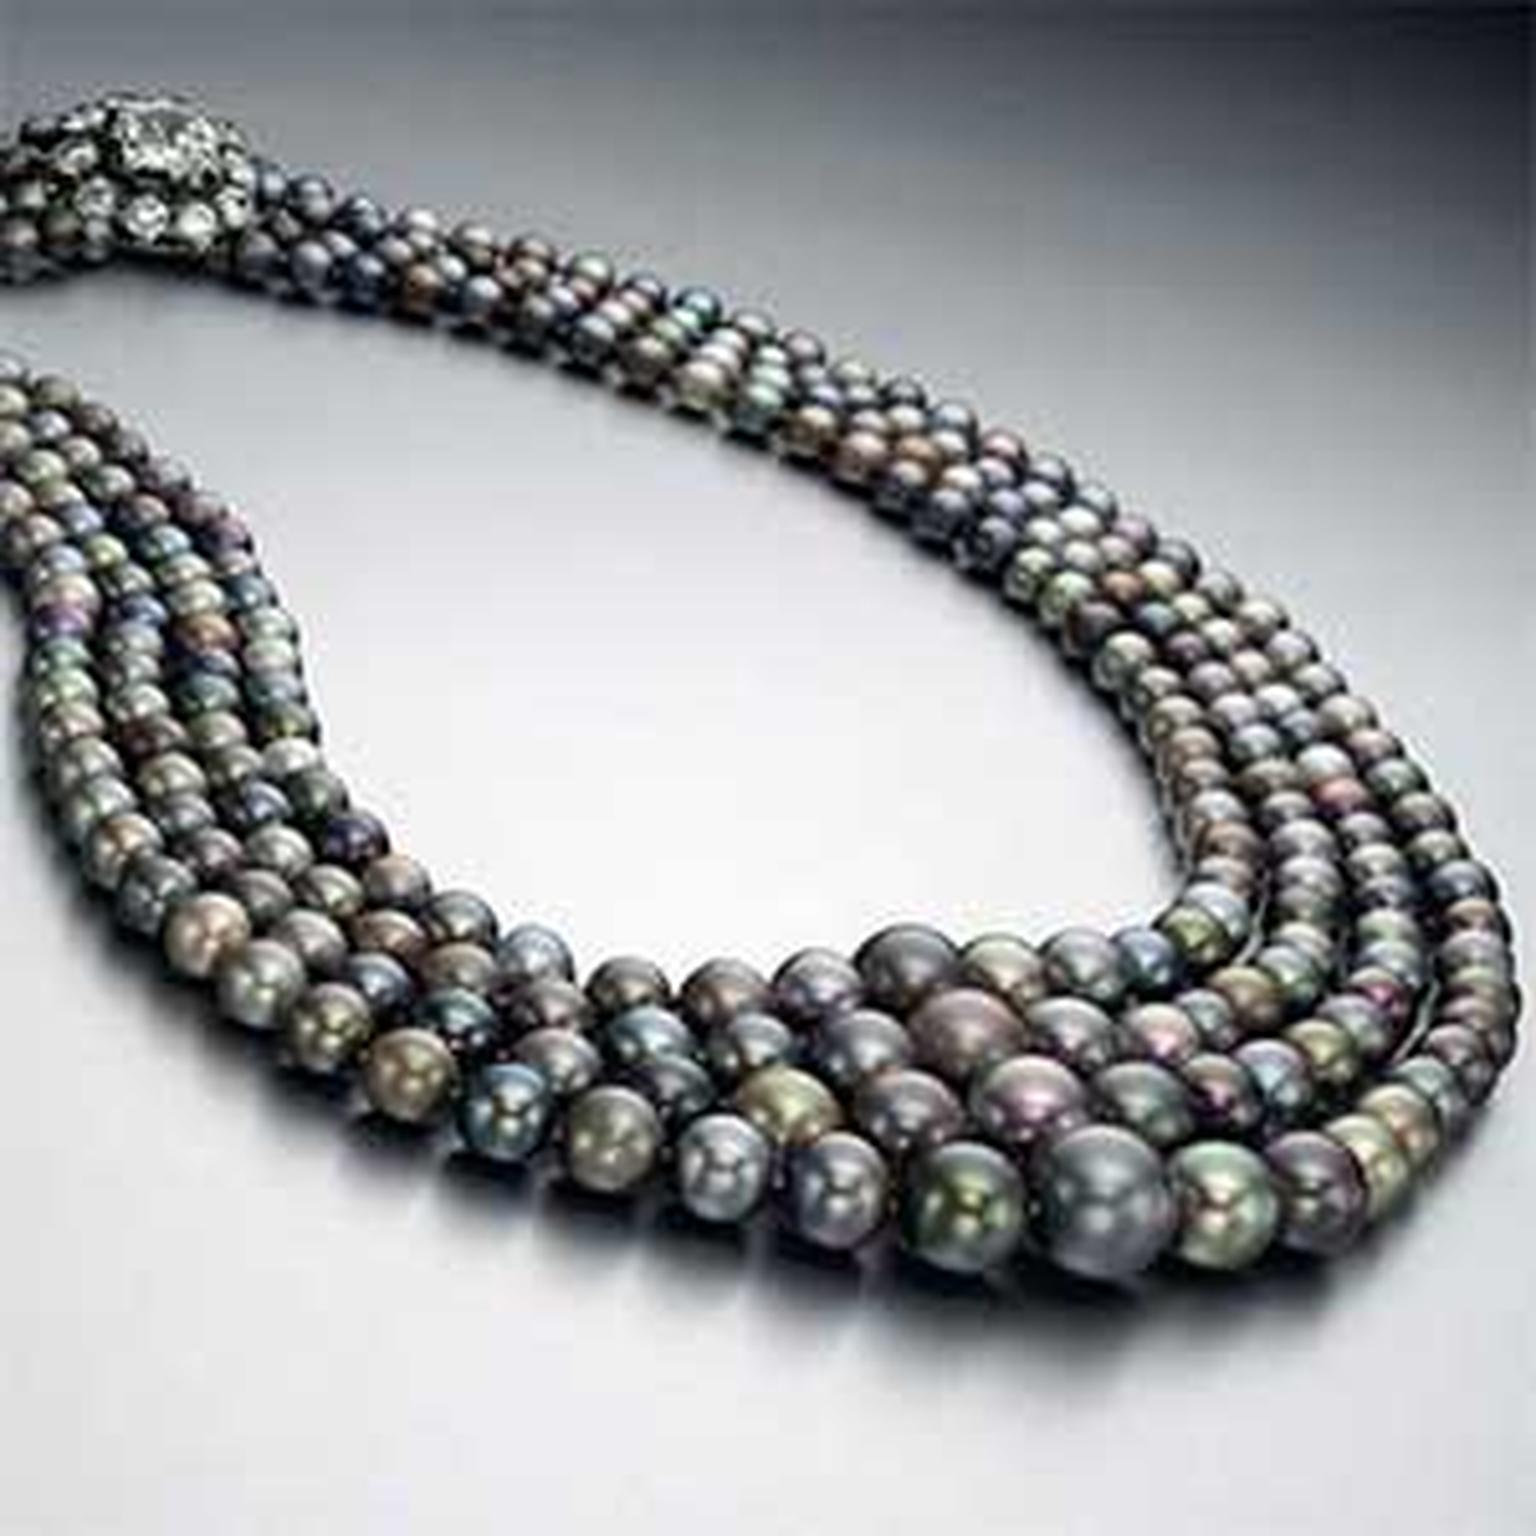 Record -breaking -pearl -necklace -Christies